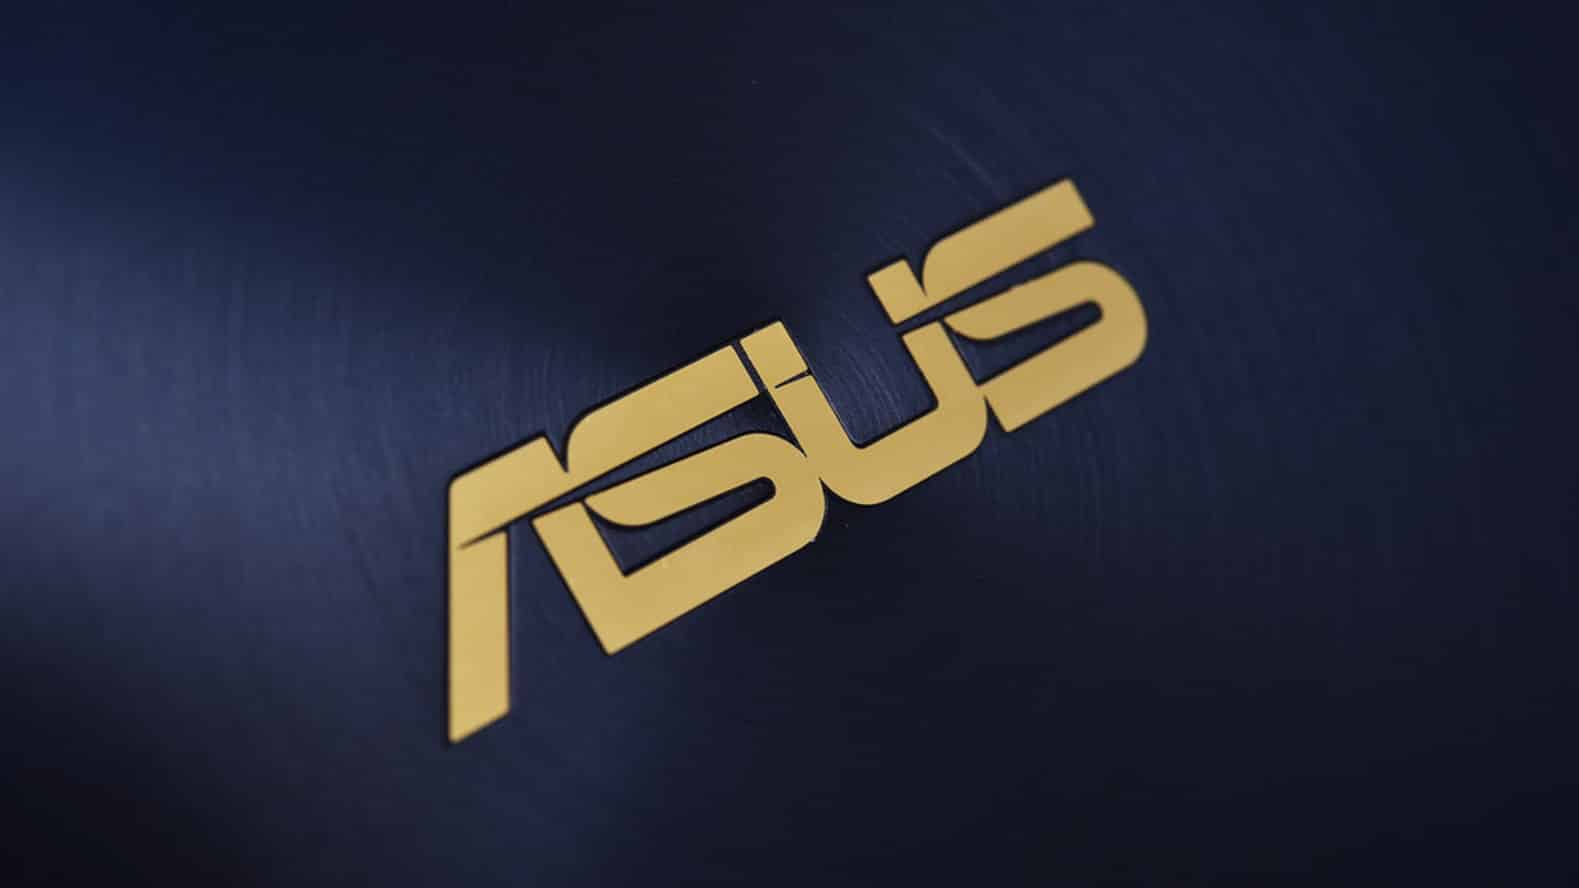 Asus Partners With Quantumcloud